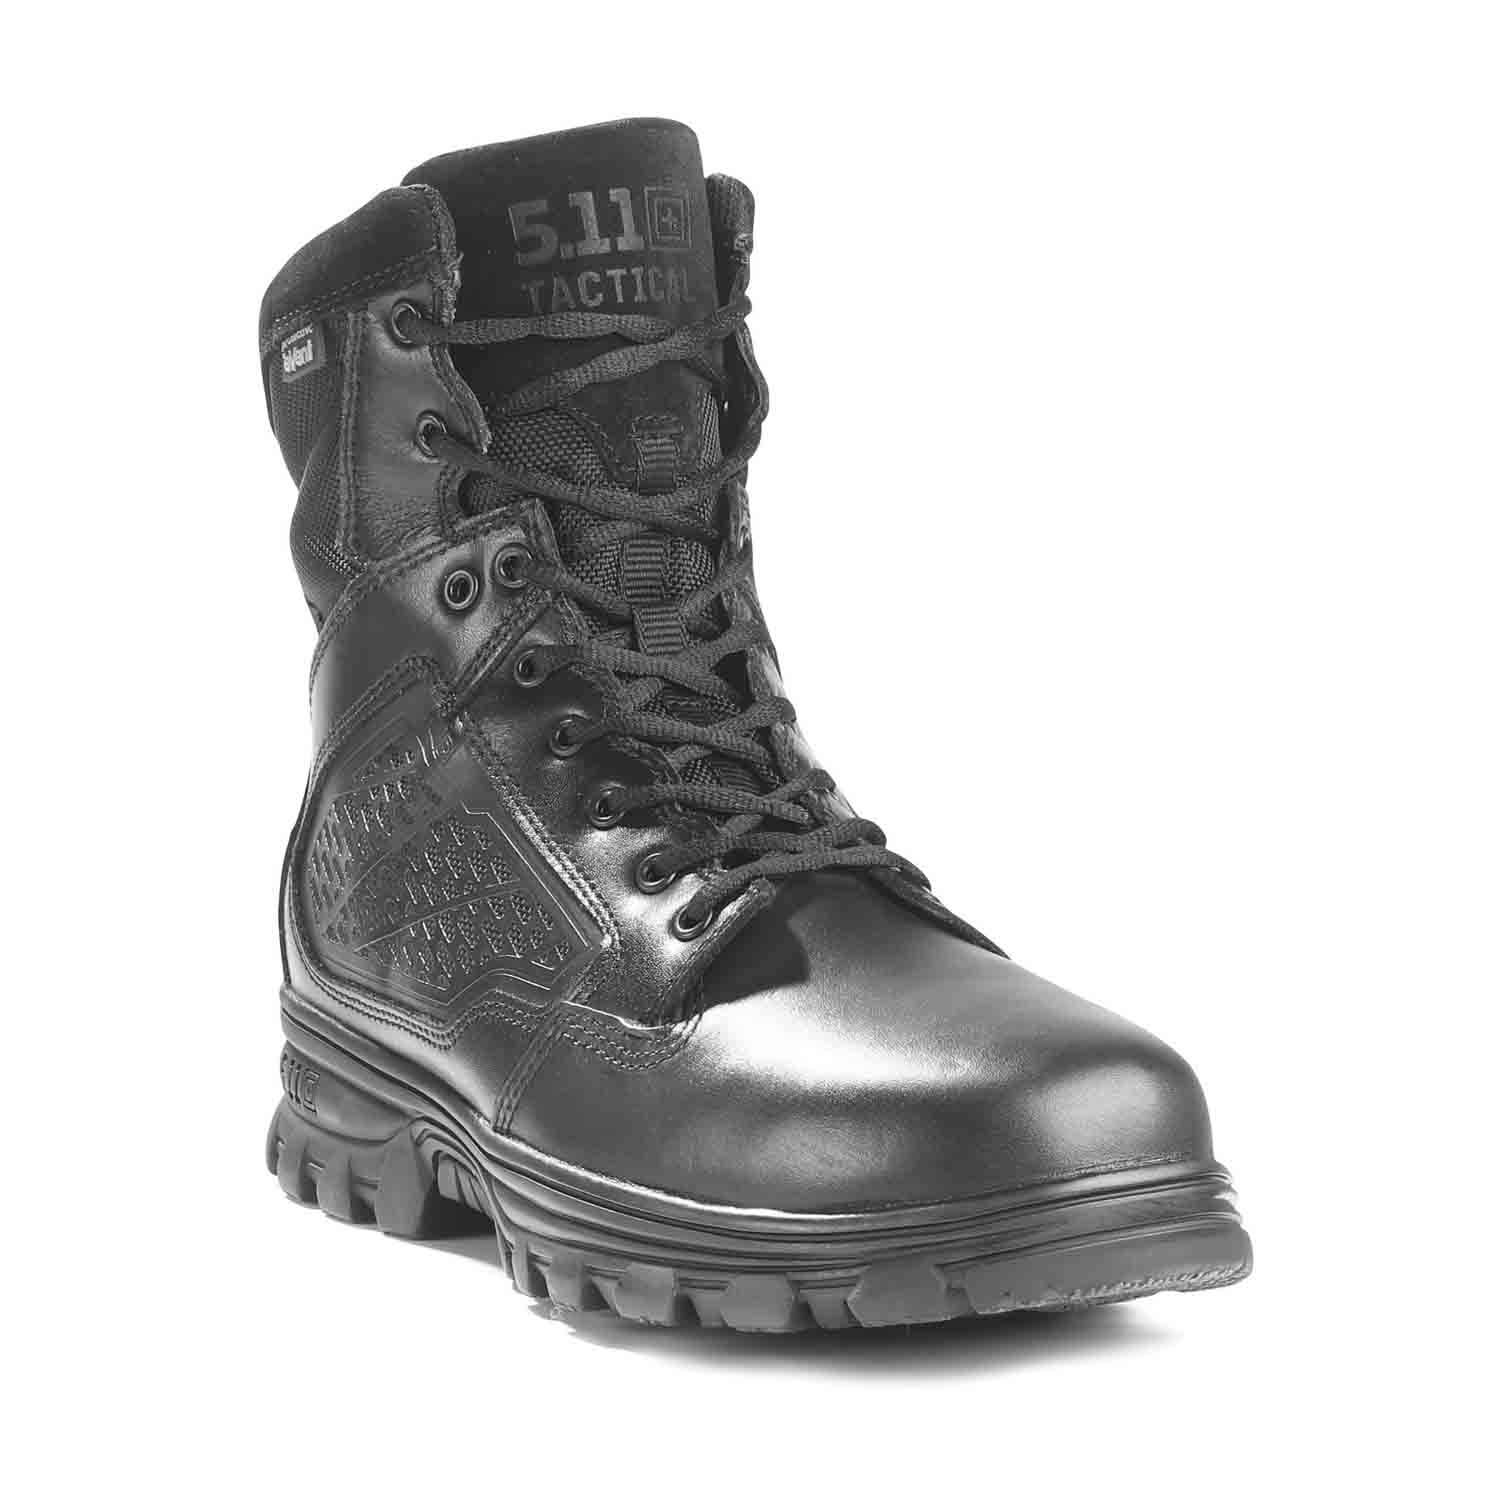 Thorogood Deuce Z-Trac 6 Inch Waterproof Side Zip Leather Tactical Mens Boots